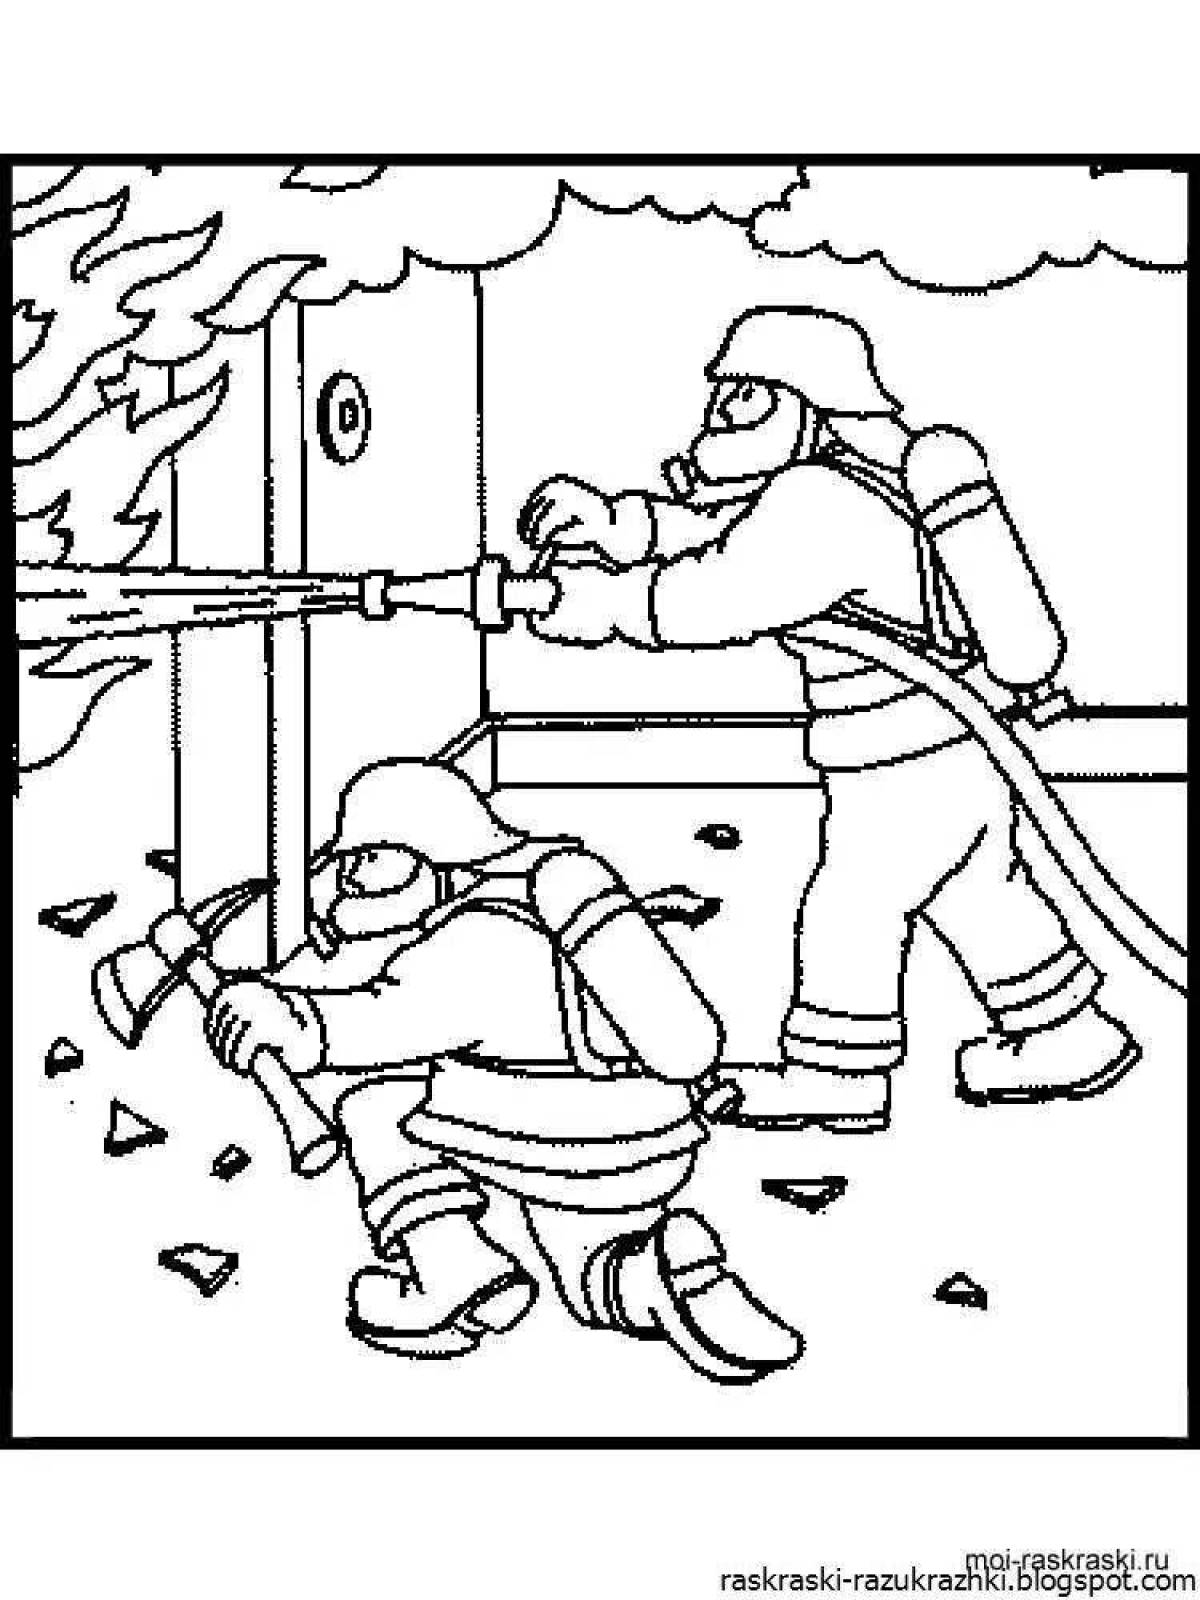 Playful fire safety coloring page